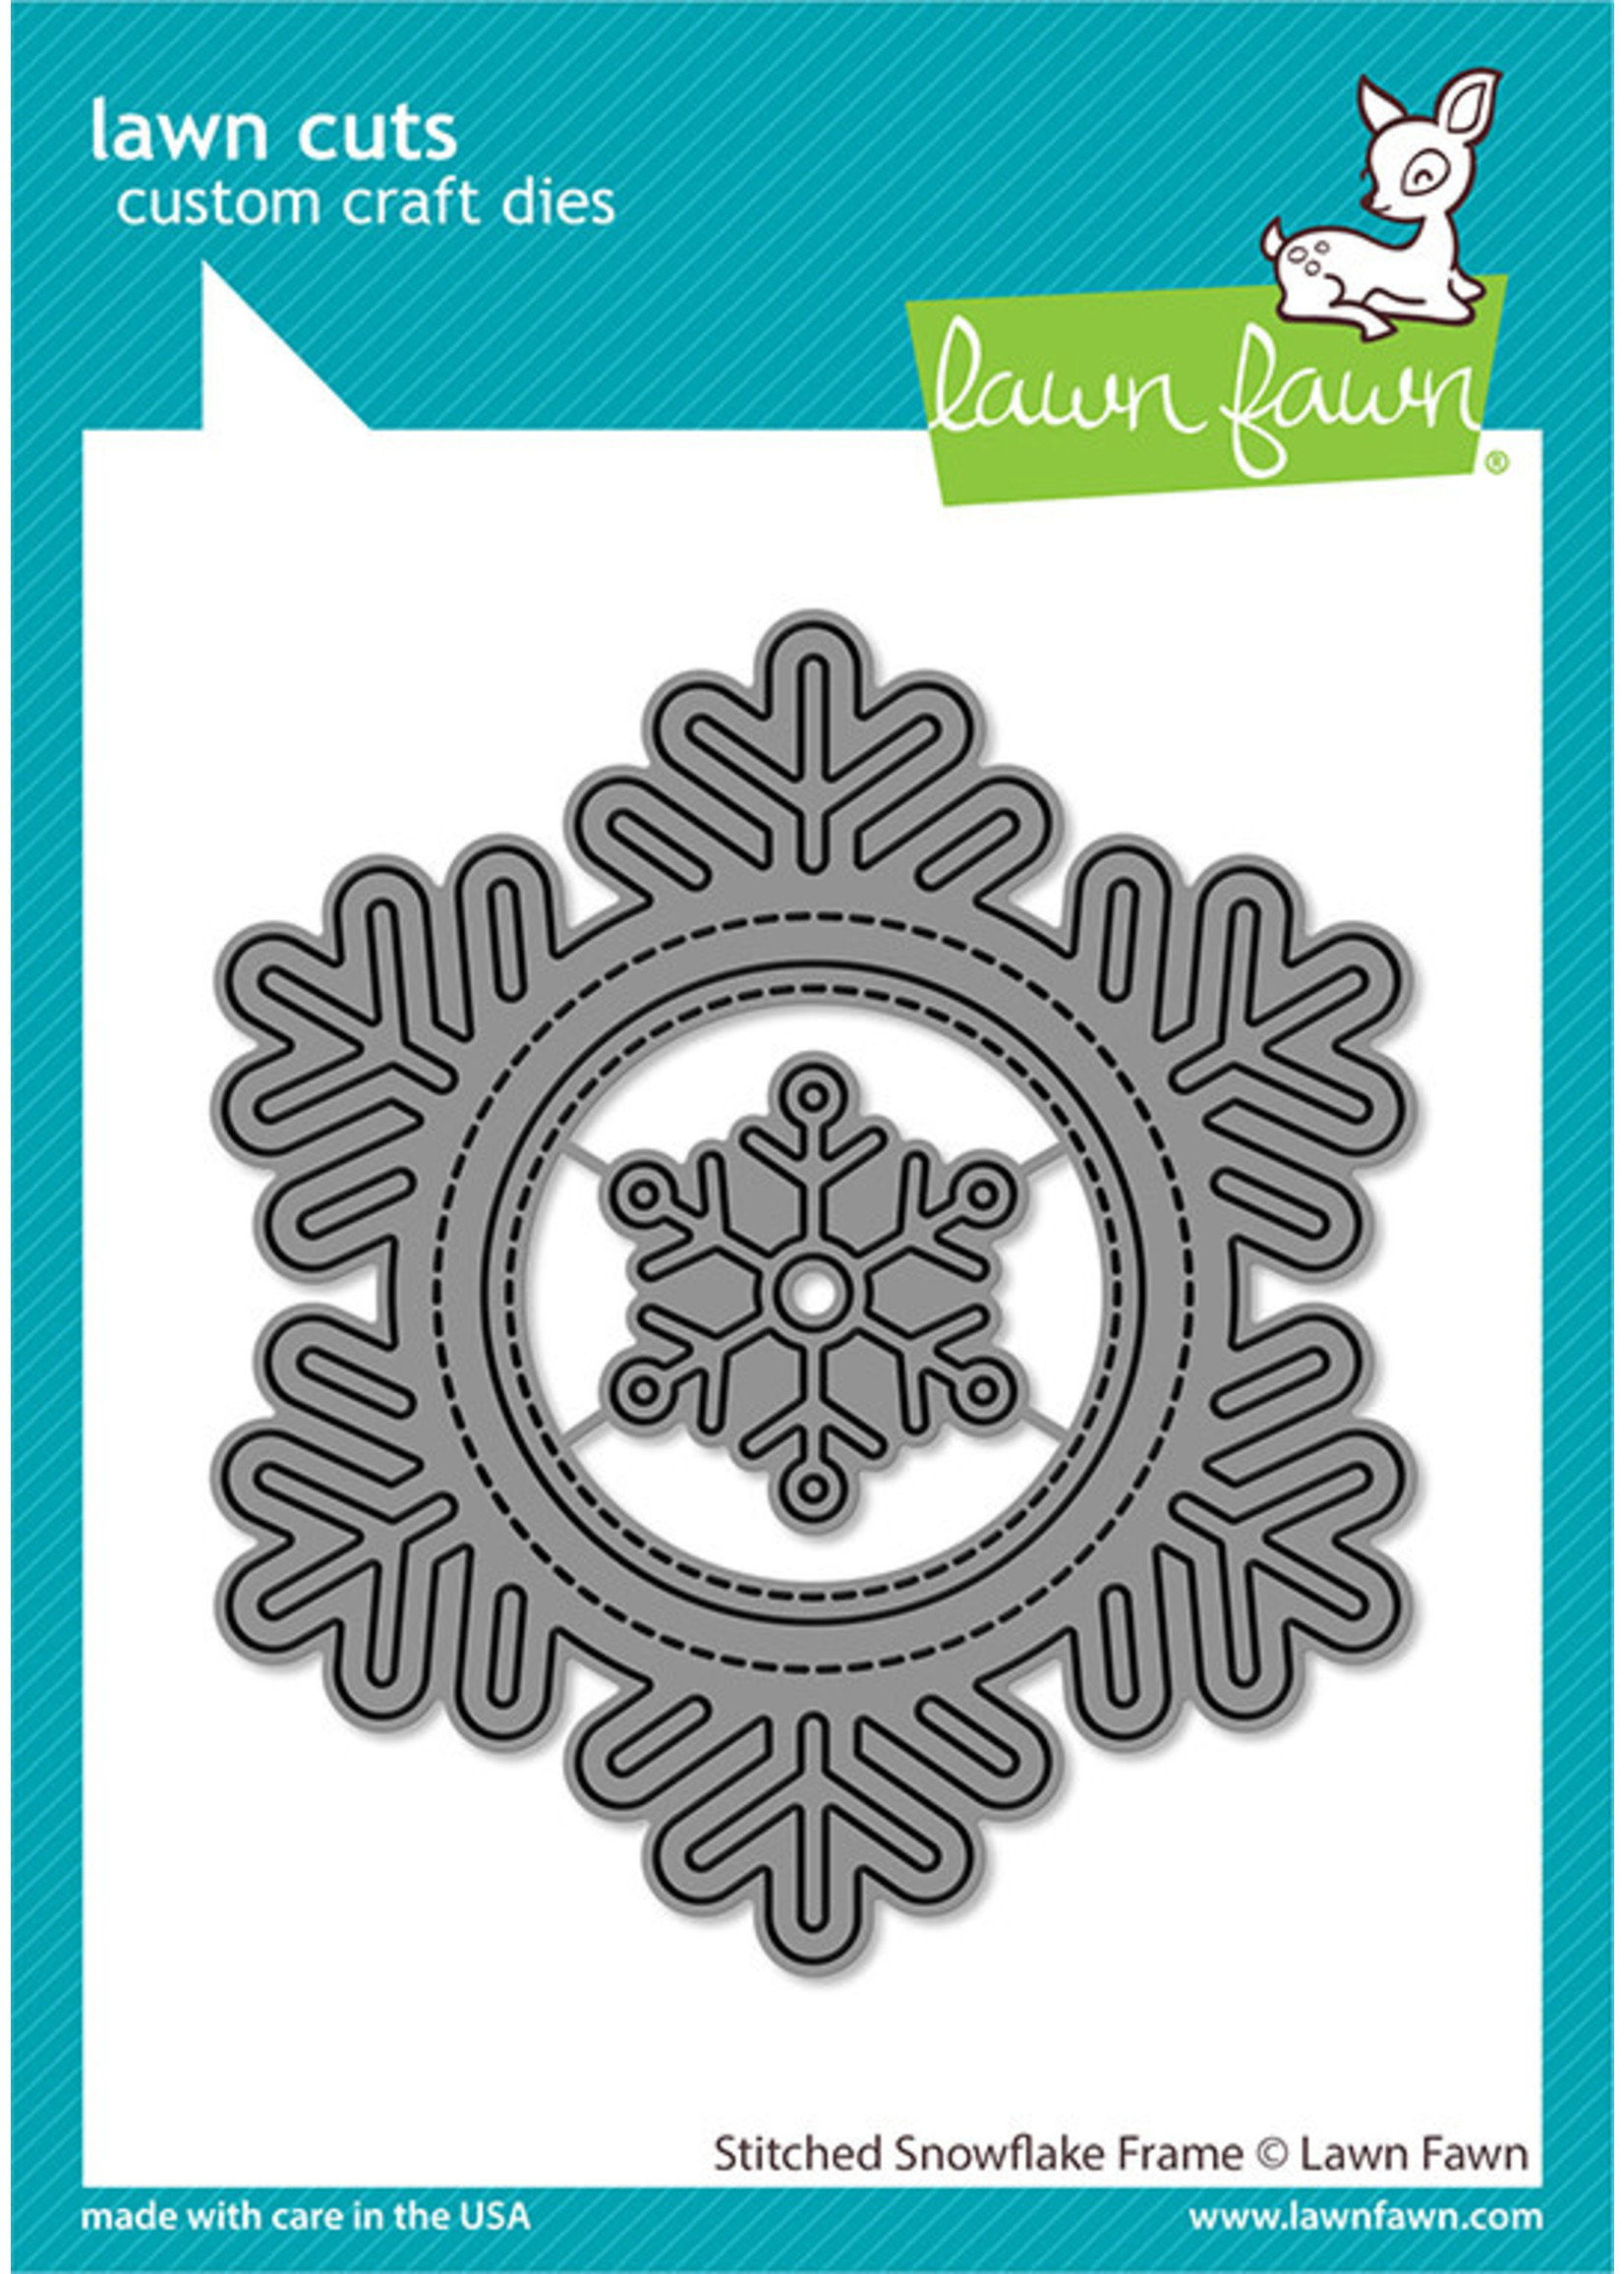 Lawn Fawn stitched snowflake frame dies